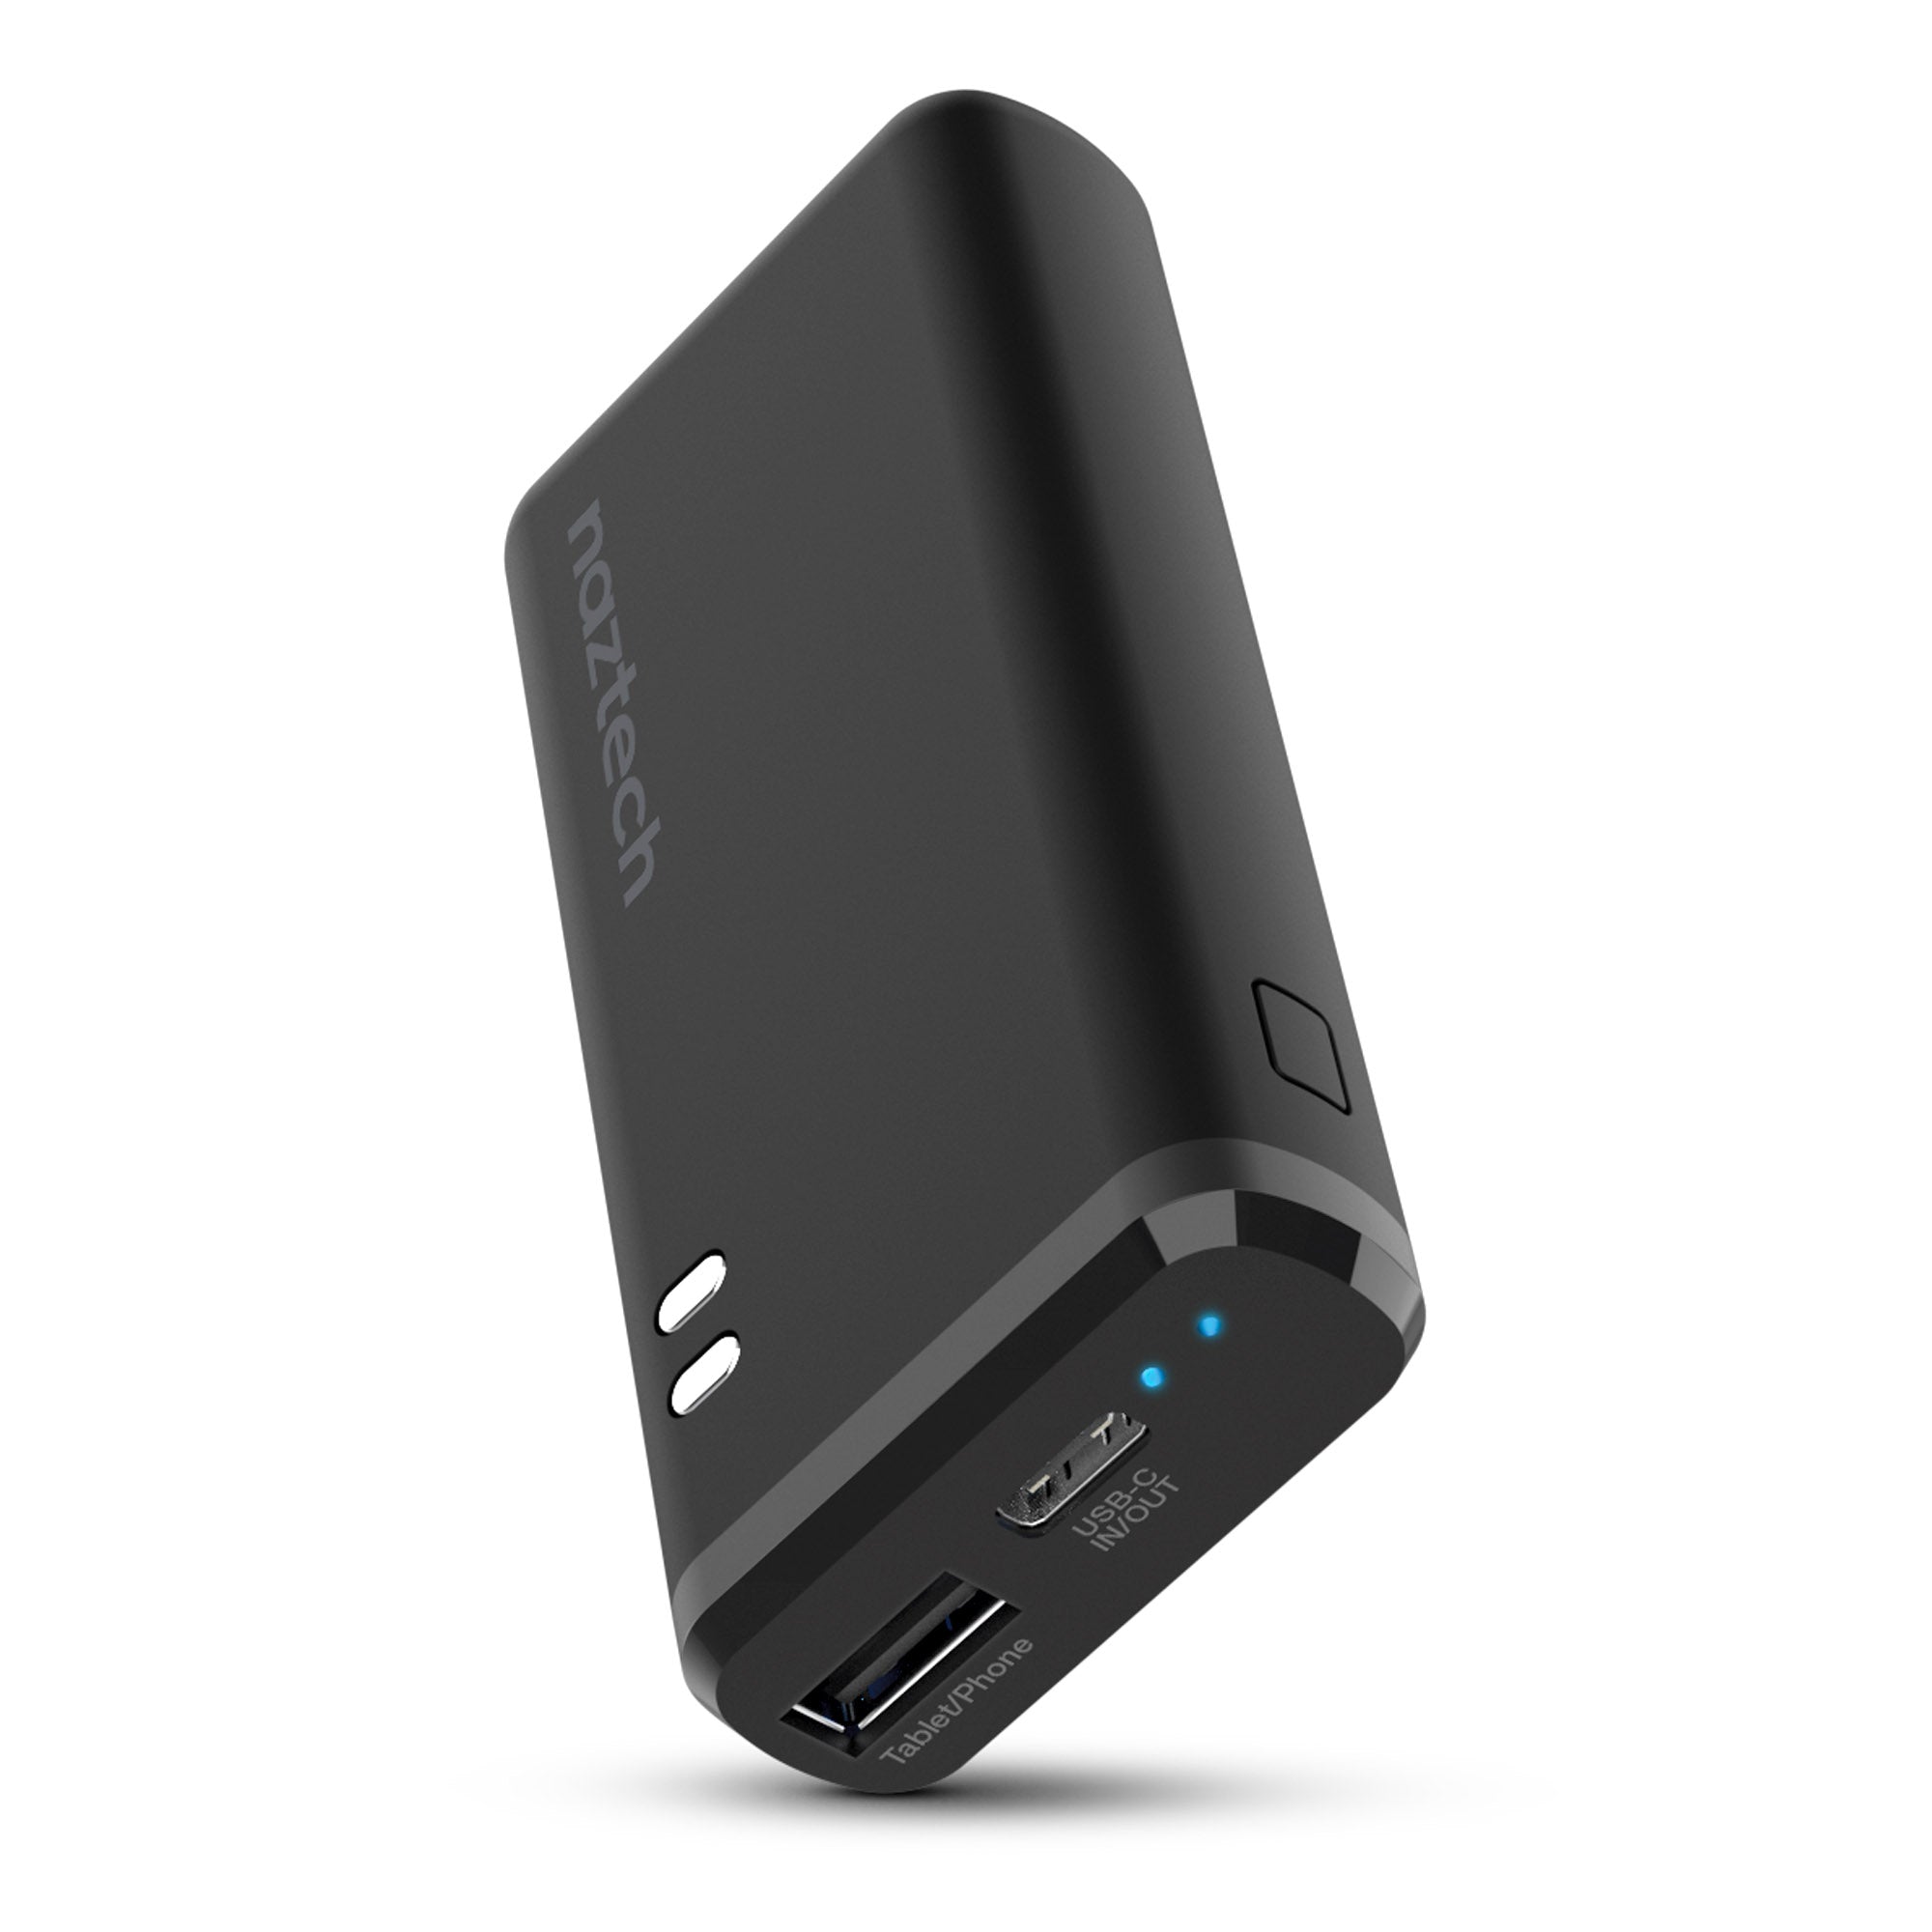 4,000mAh | USB-C + USB Power Bank | Add-On for the Ultimate Charging Station Pro | Black